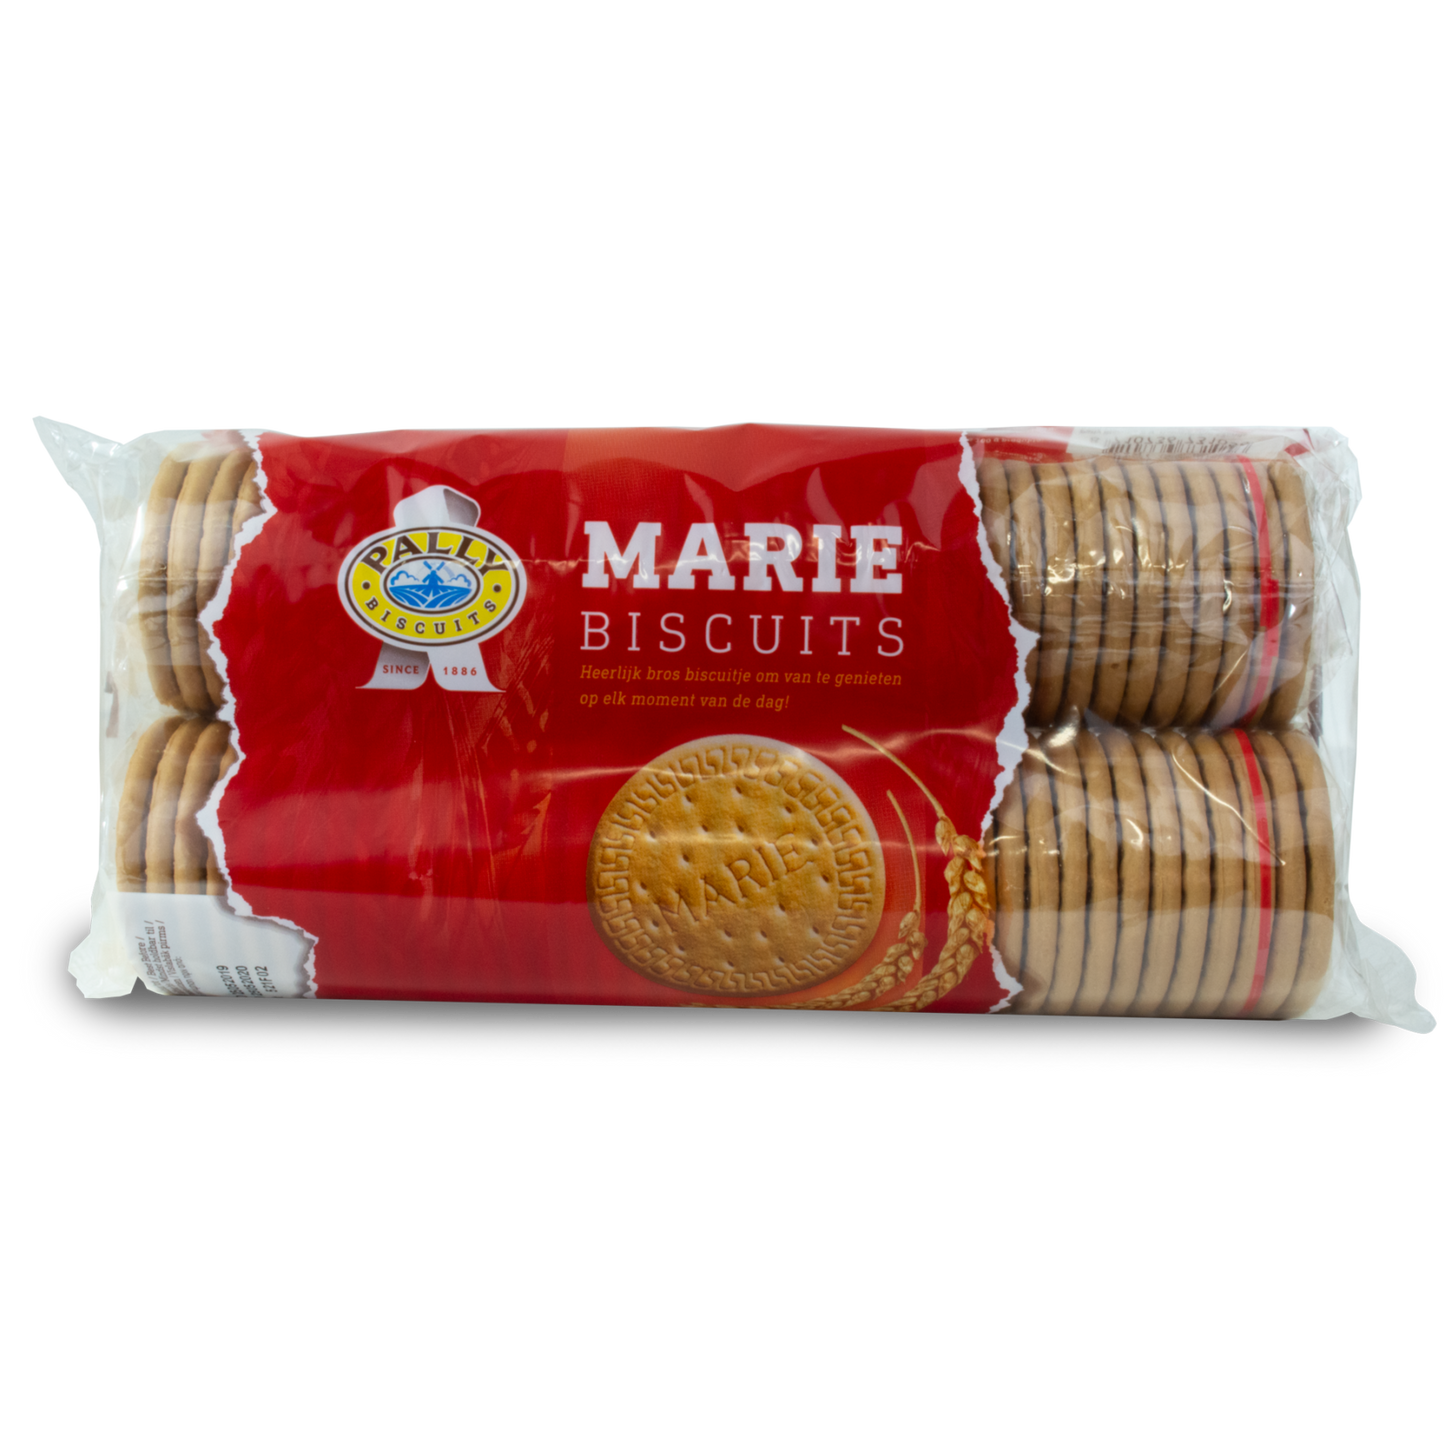 PALLY MARIA Biscuits